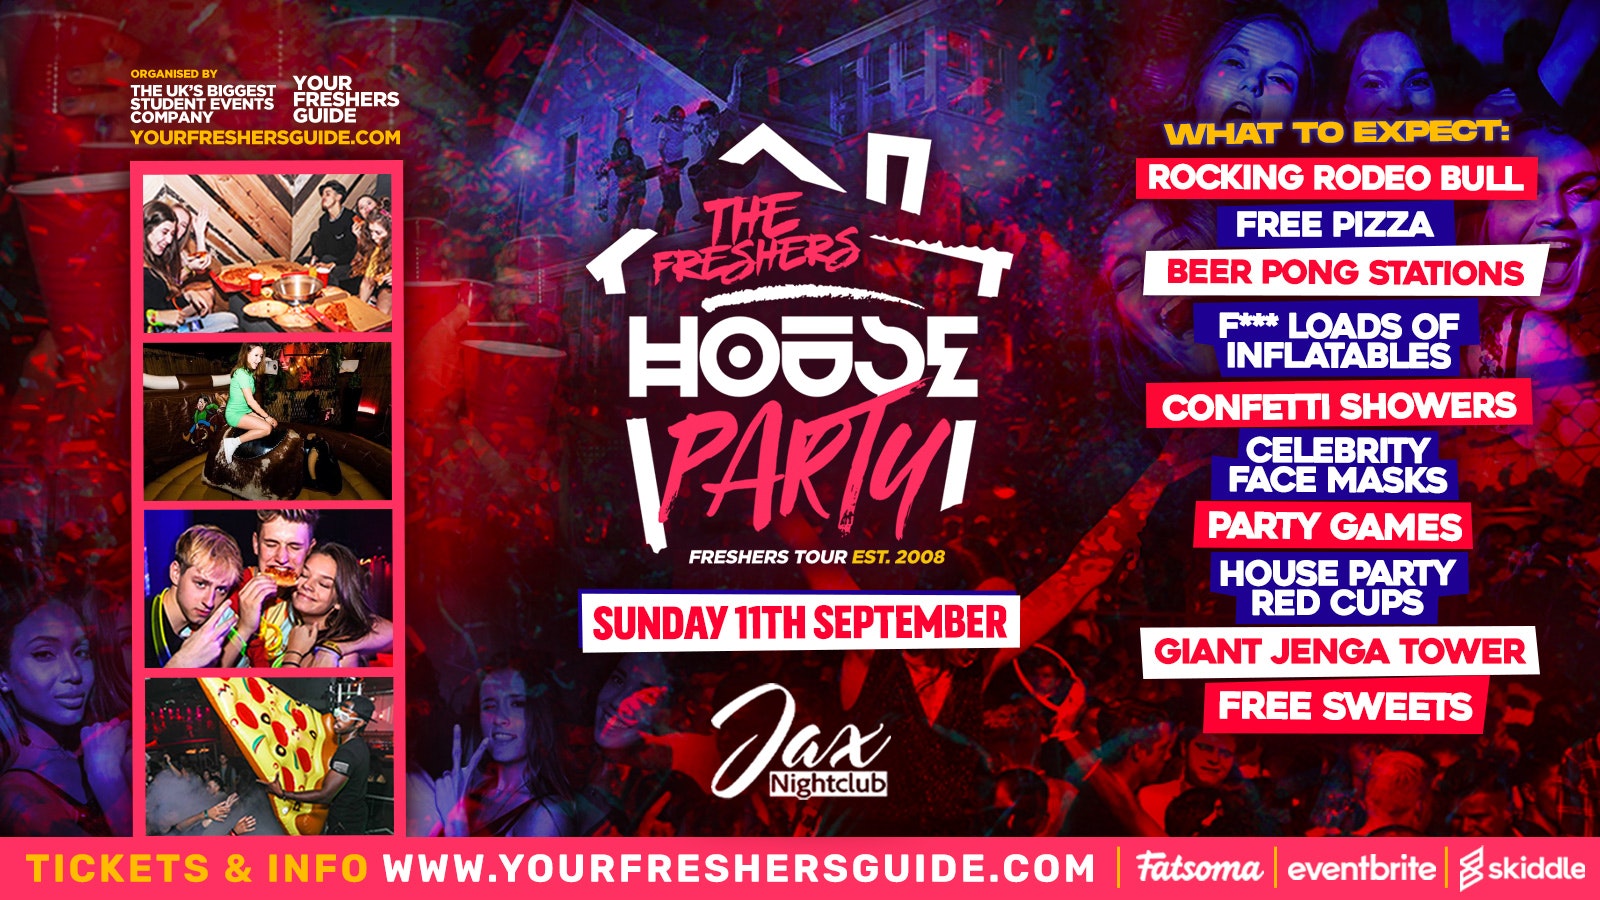 The Freshers House Party | Gloucestershire Freshers 2022 – Returners Tickets!